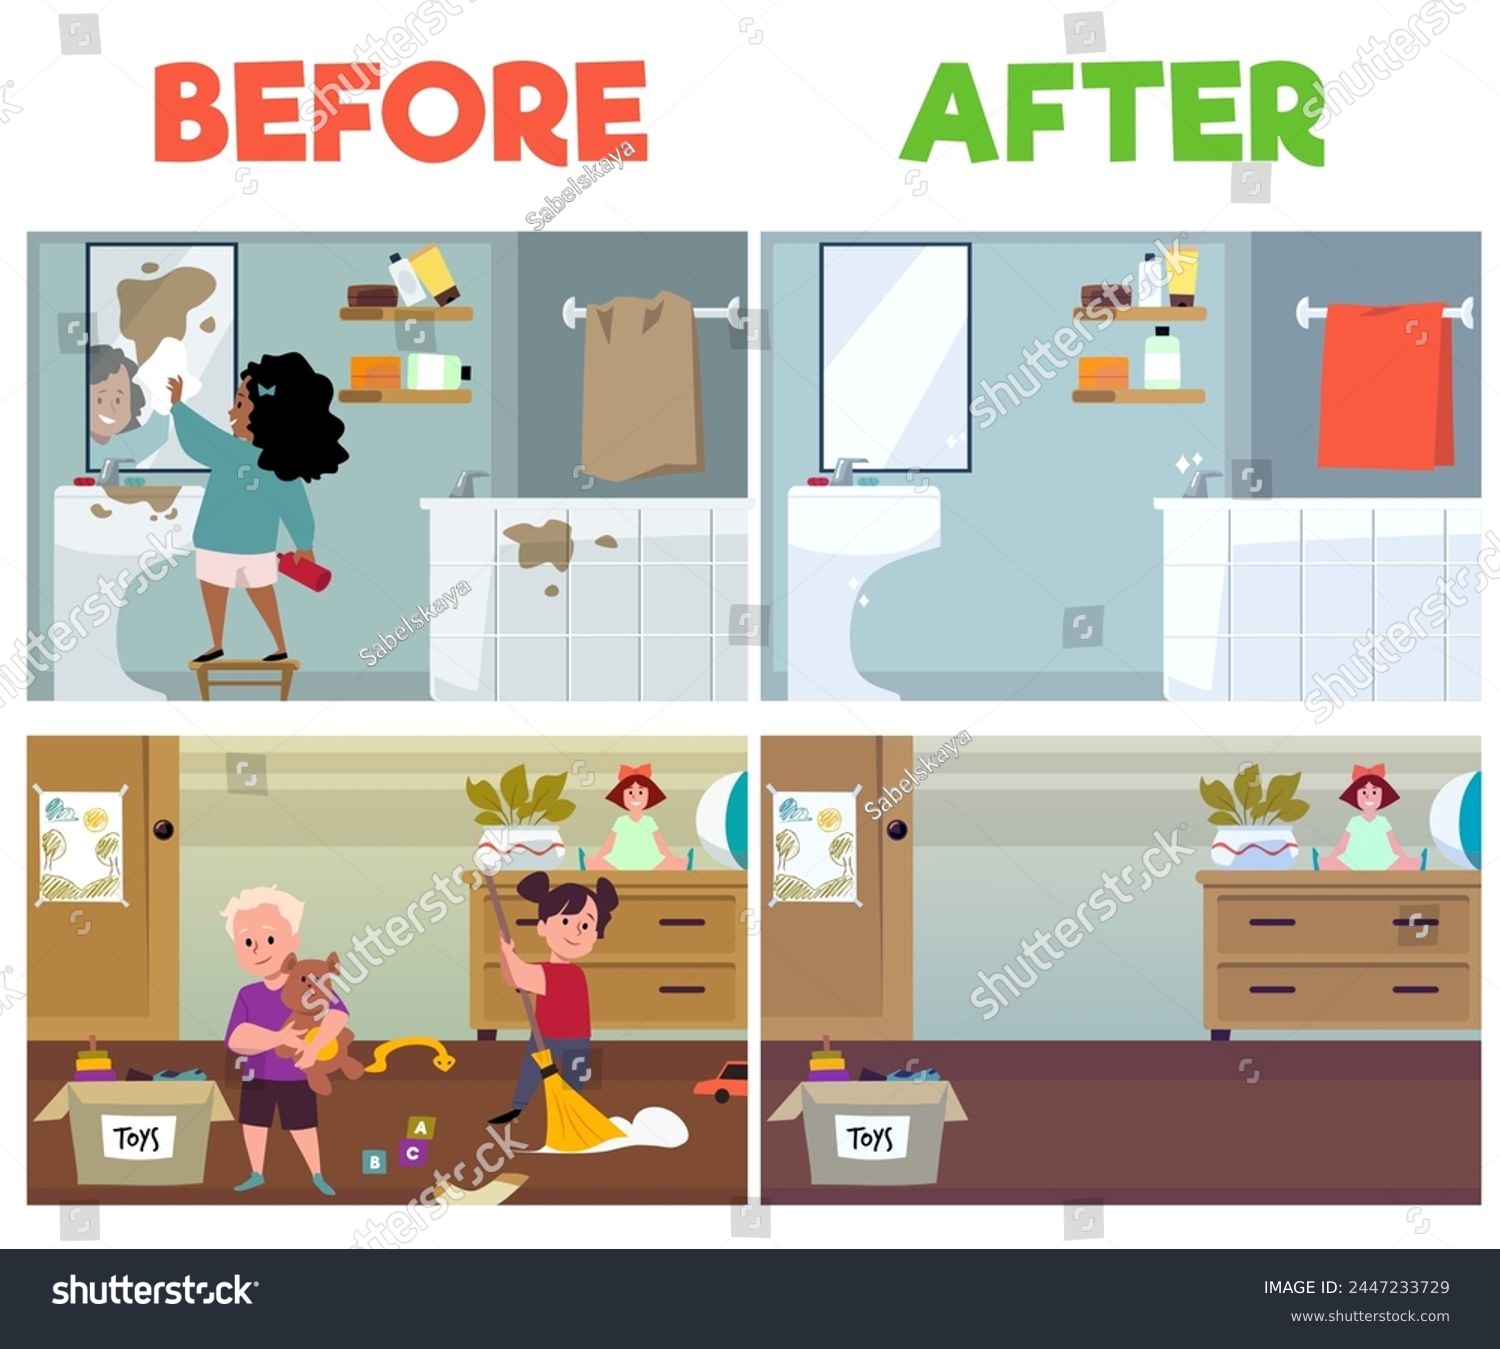 SVG of Rooms before and after children's cleaning flat style, vector illustration isolated on white background. Kid washing mirror and bathroom, smiling boy and girl collect toys and sweep svg